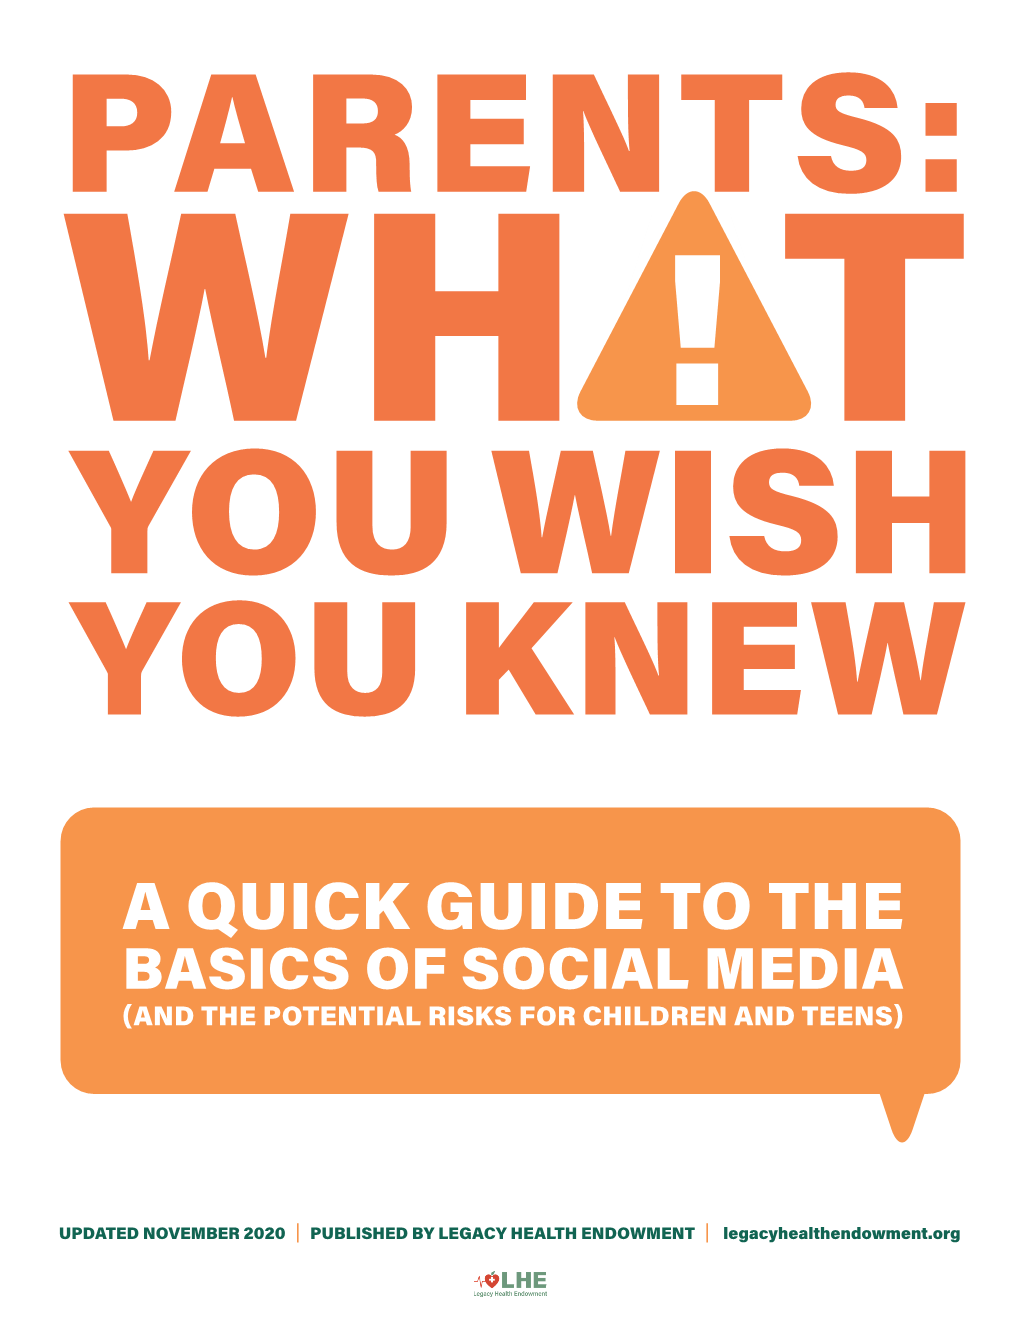 A Quick Guide to the Basics of Social Media (And the Potential Risks for Children and Teens)